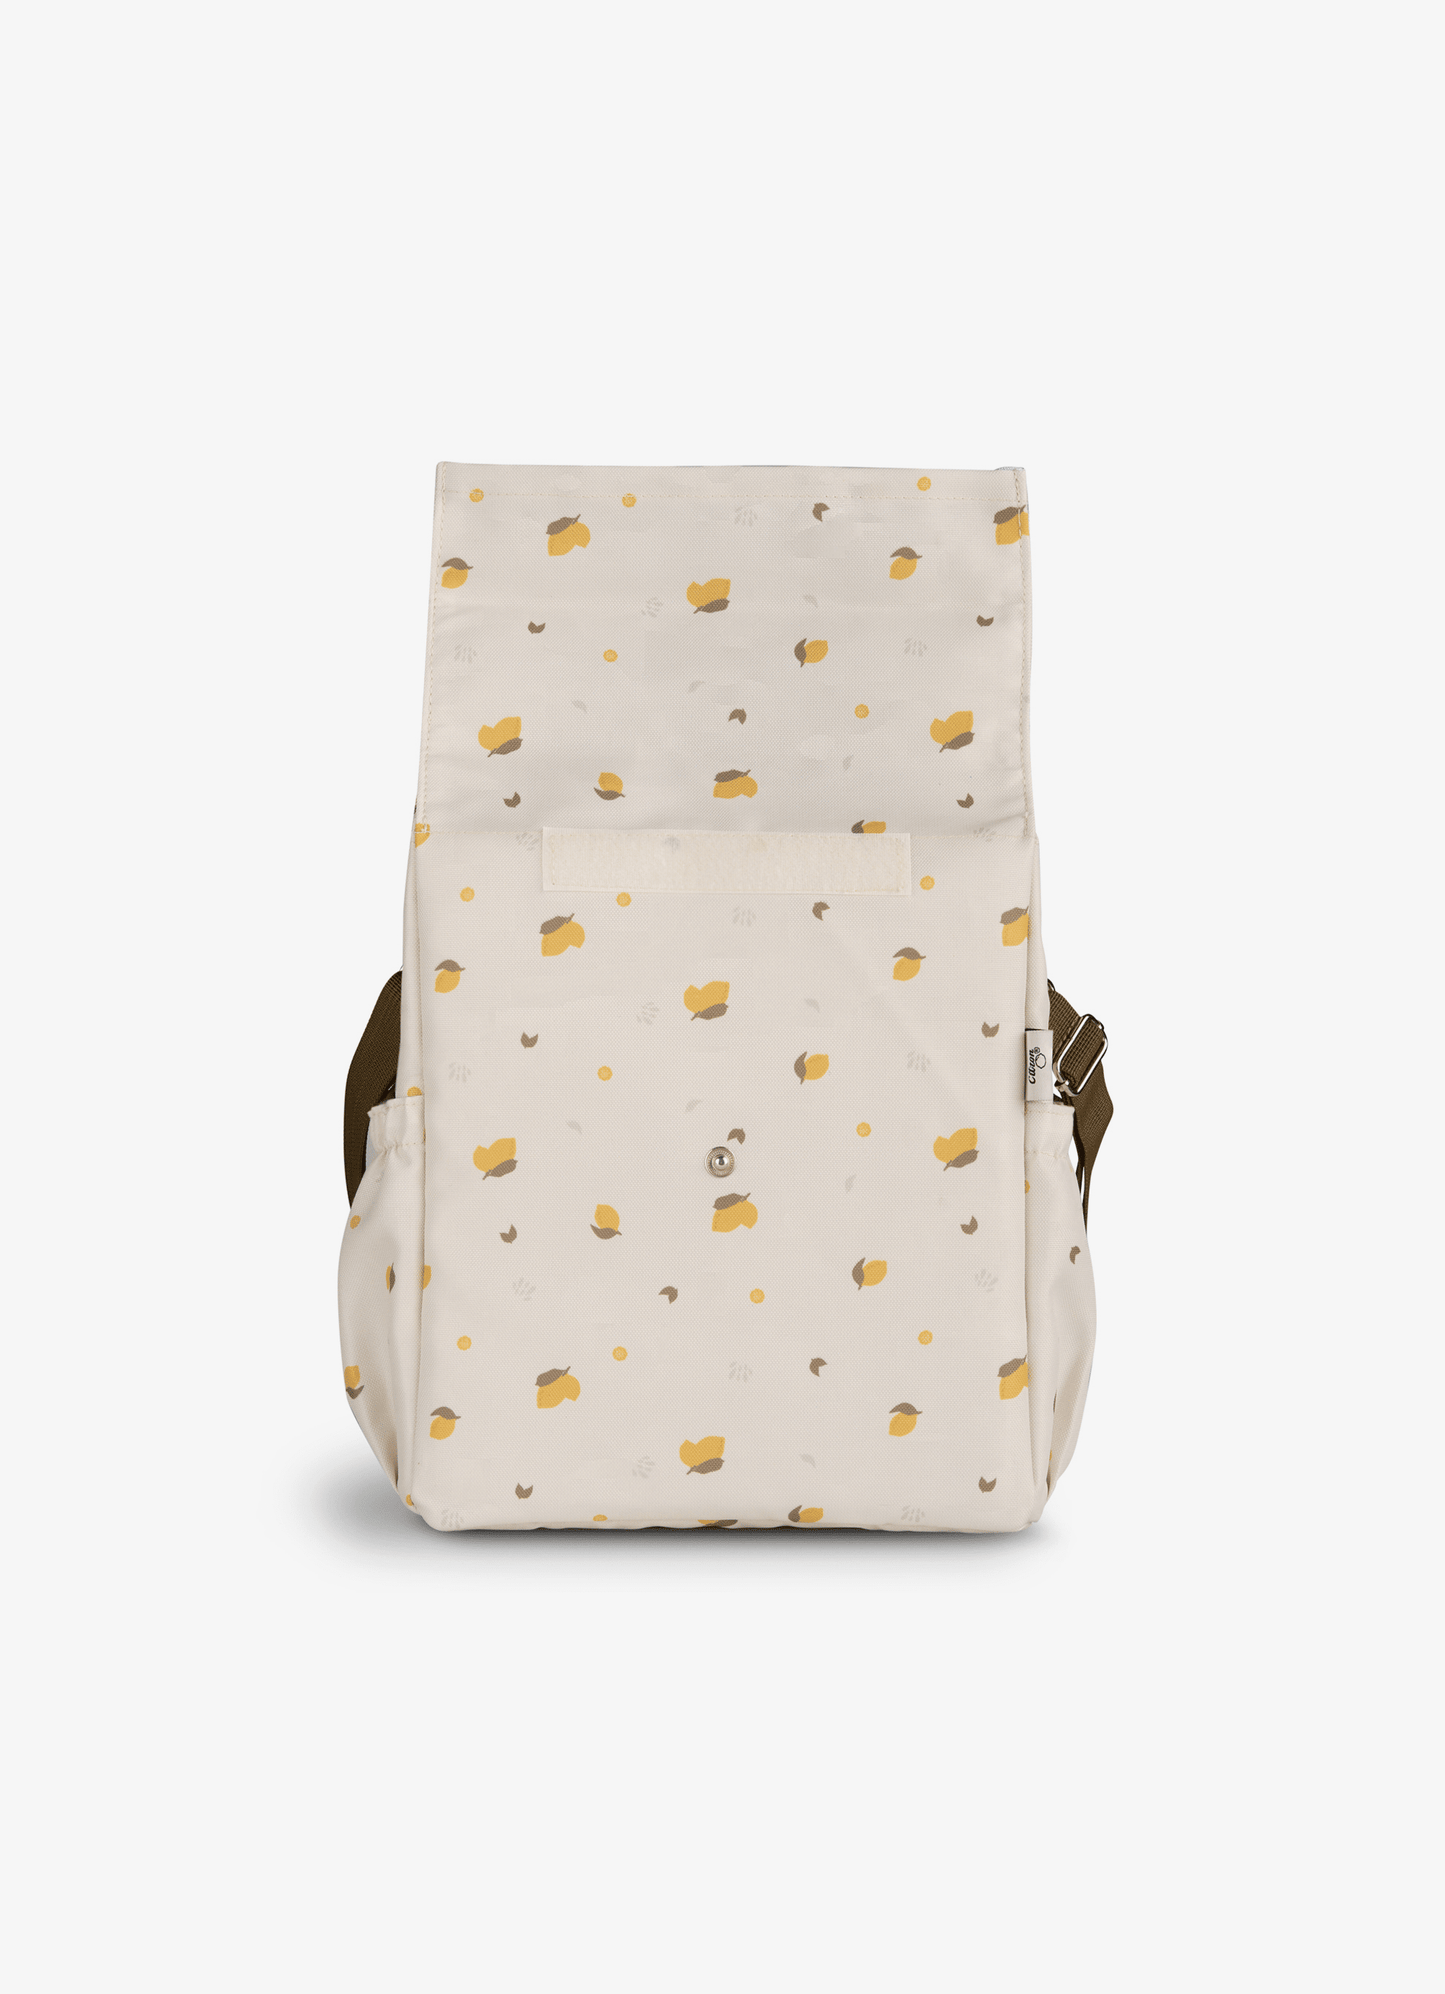 Insulated Roll-up Lunch Bag - Lemon